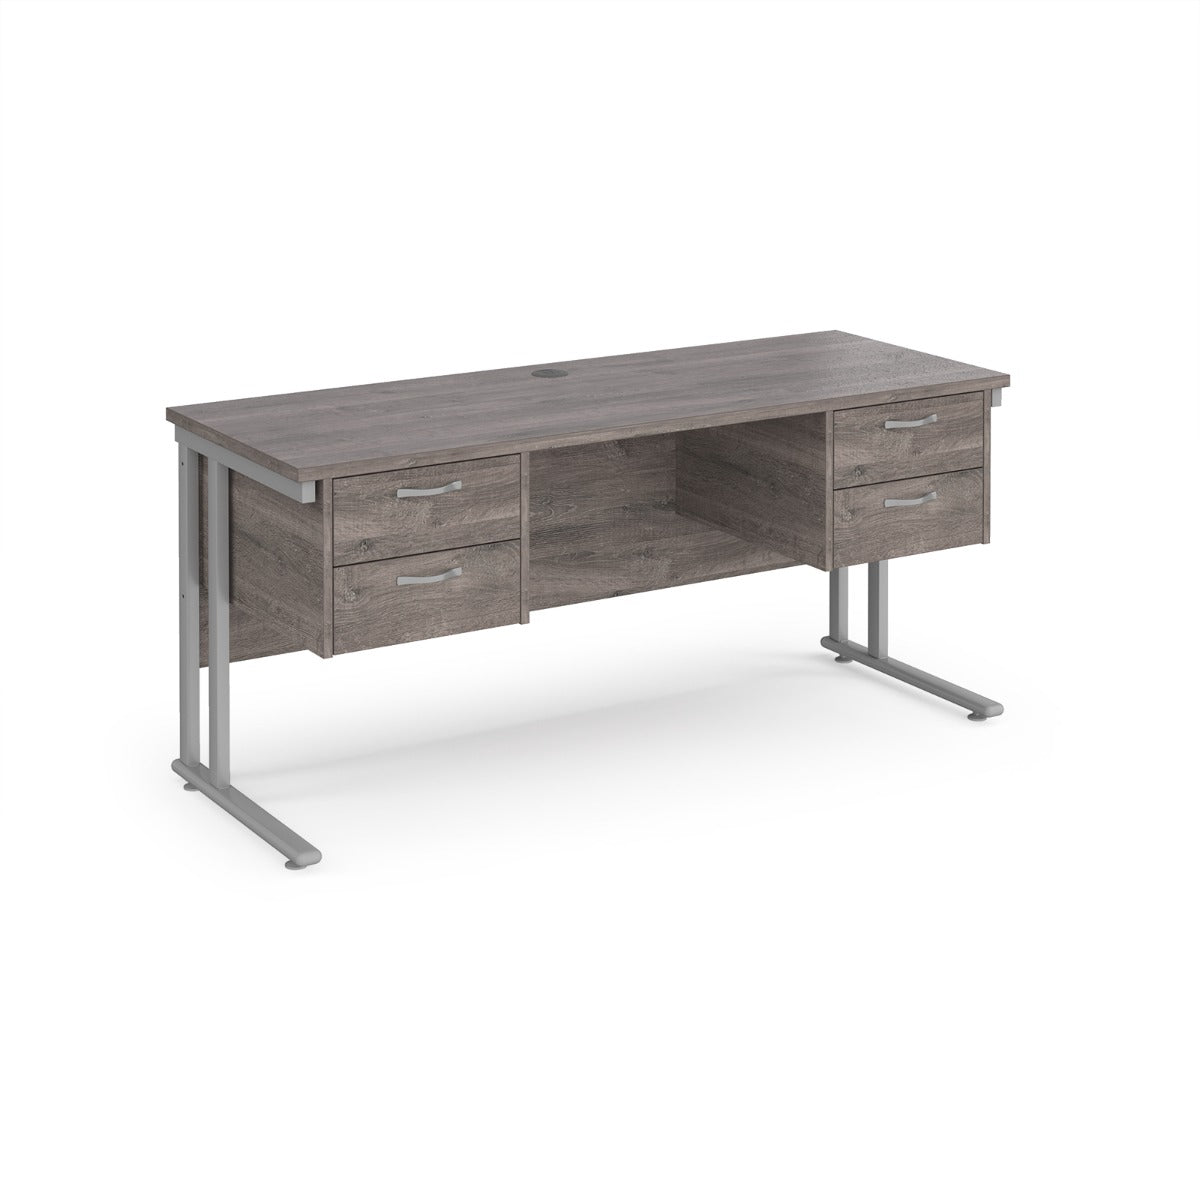 Maestro 600mm Deep Straight Cantilever Leg Office Desk with Two and Two Drawer Pedestal